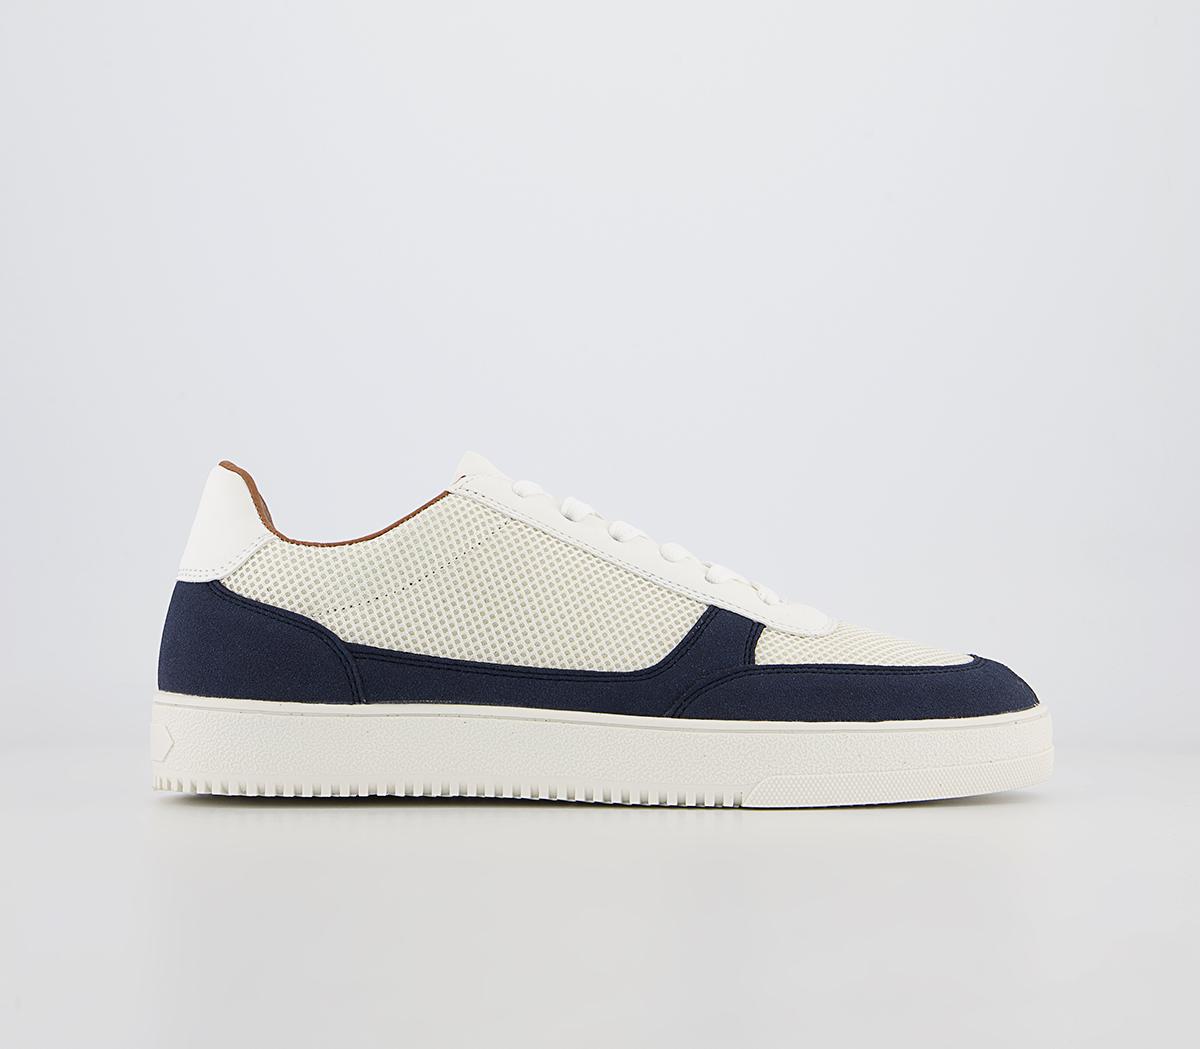 OFFICEConor Mesh Sports SneakersWhite Navy